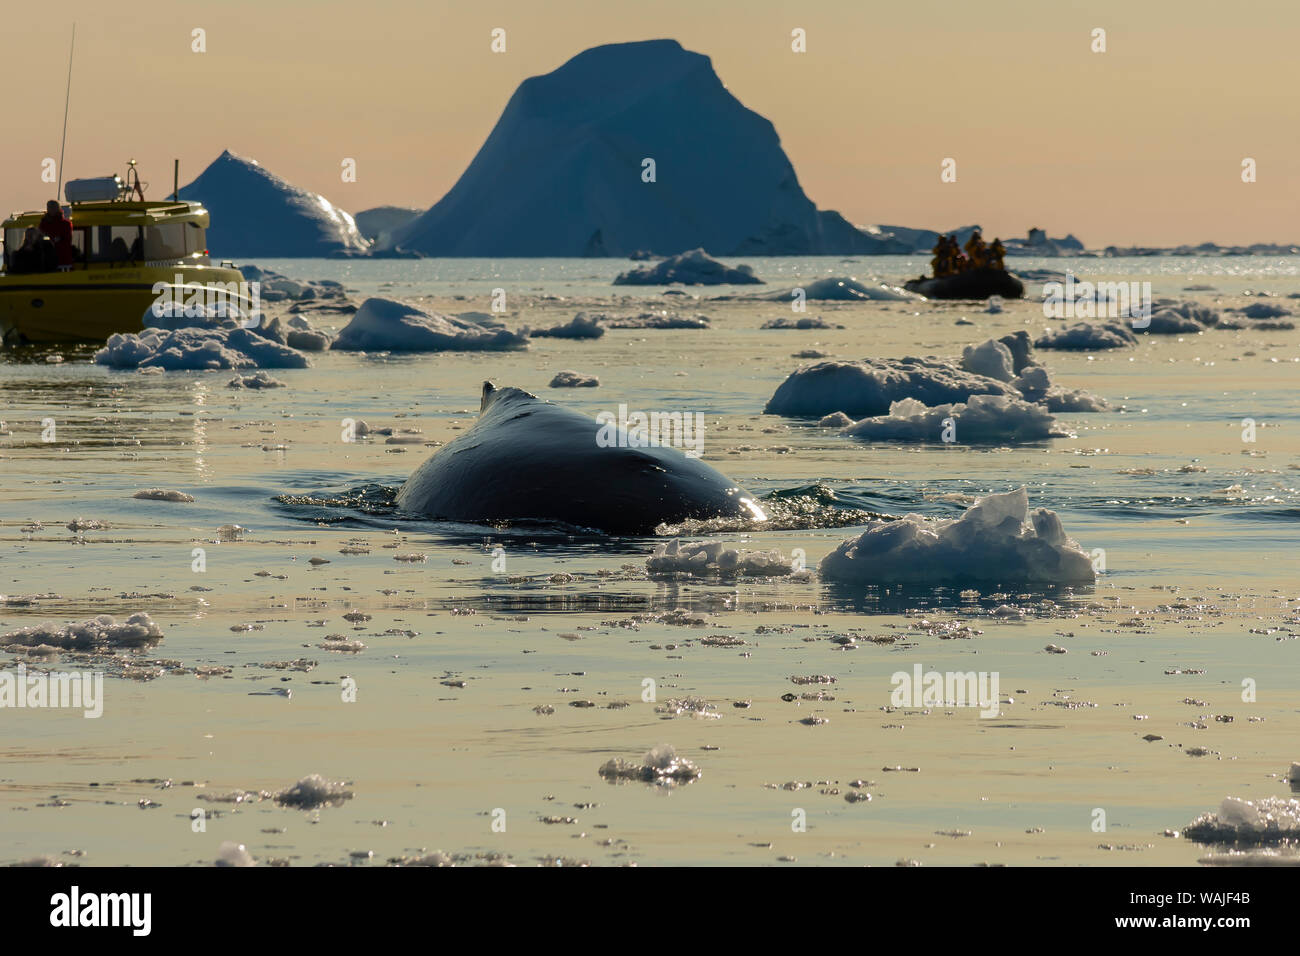 Greenland. Ilulissat. Humpback whale watching in the Icefjord. Stock Photo